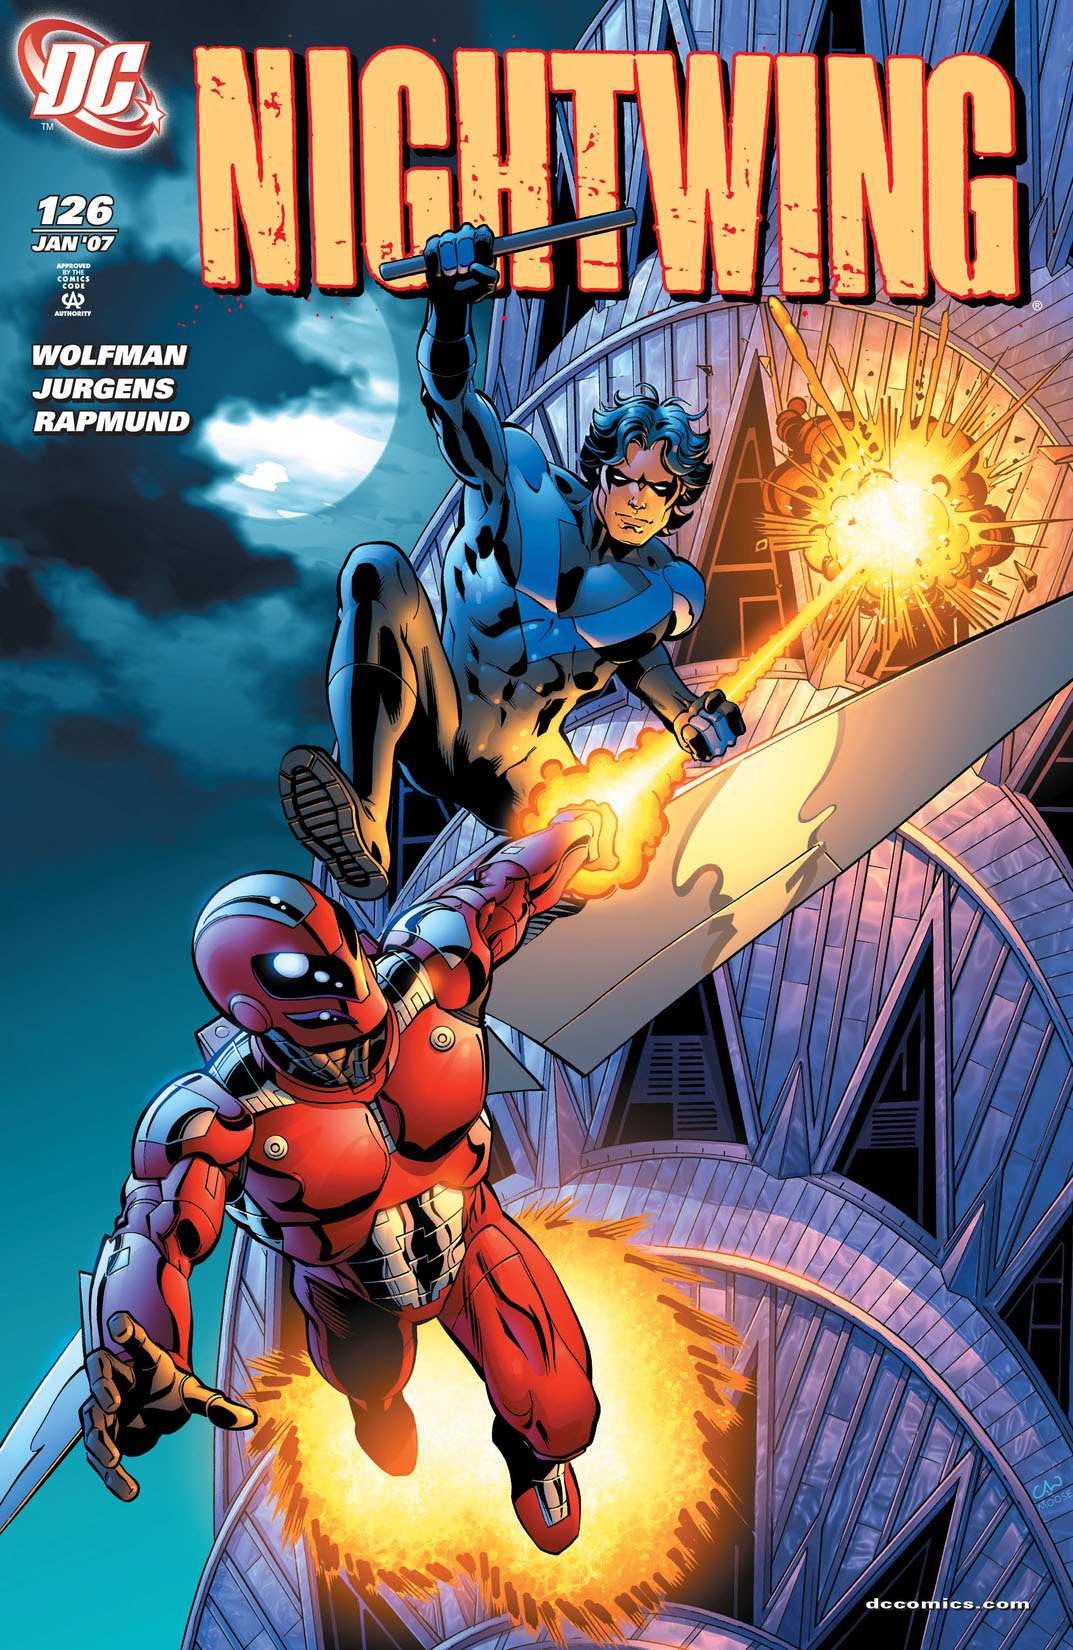 Nightwing (1996-) #126 preview images